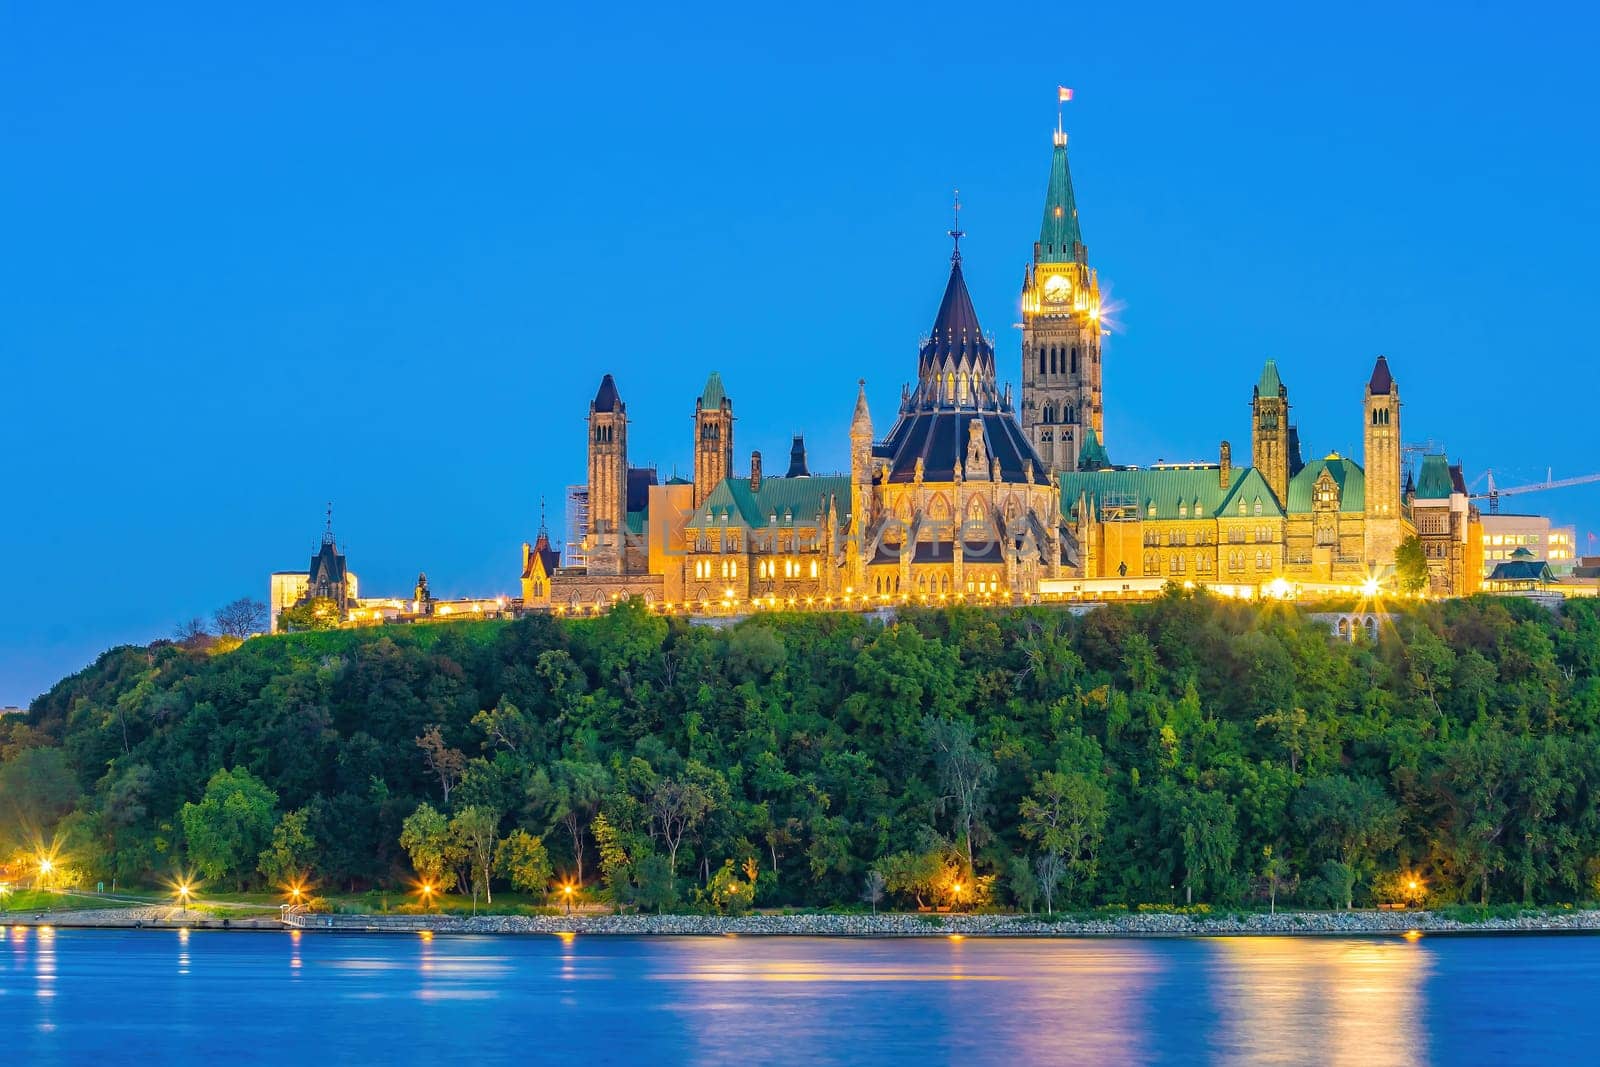 Ottawa city skyline and Parliament Hill in Ontario, Canada by f11photo